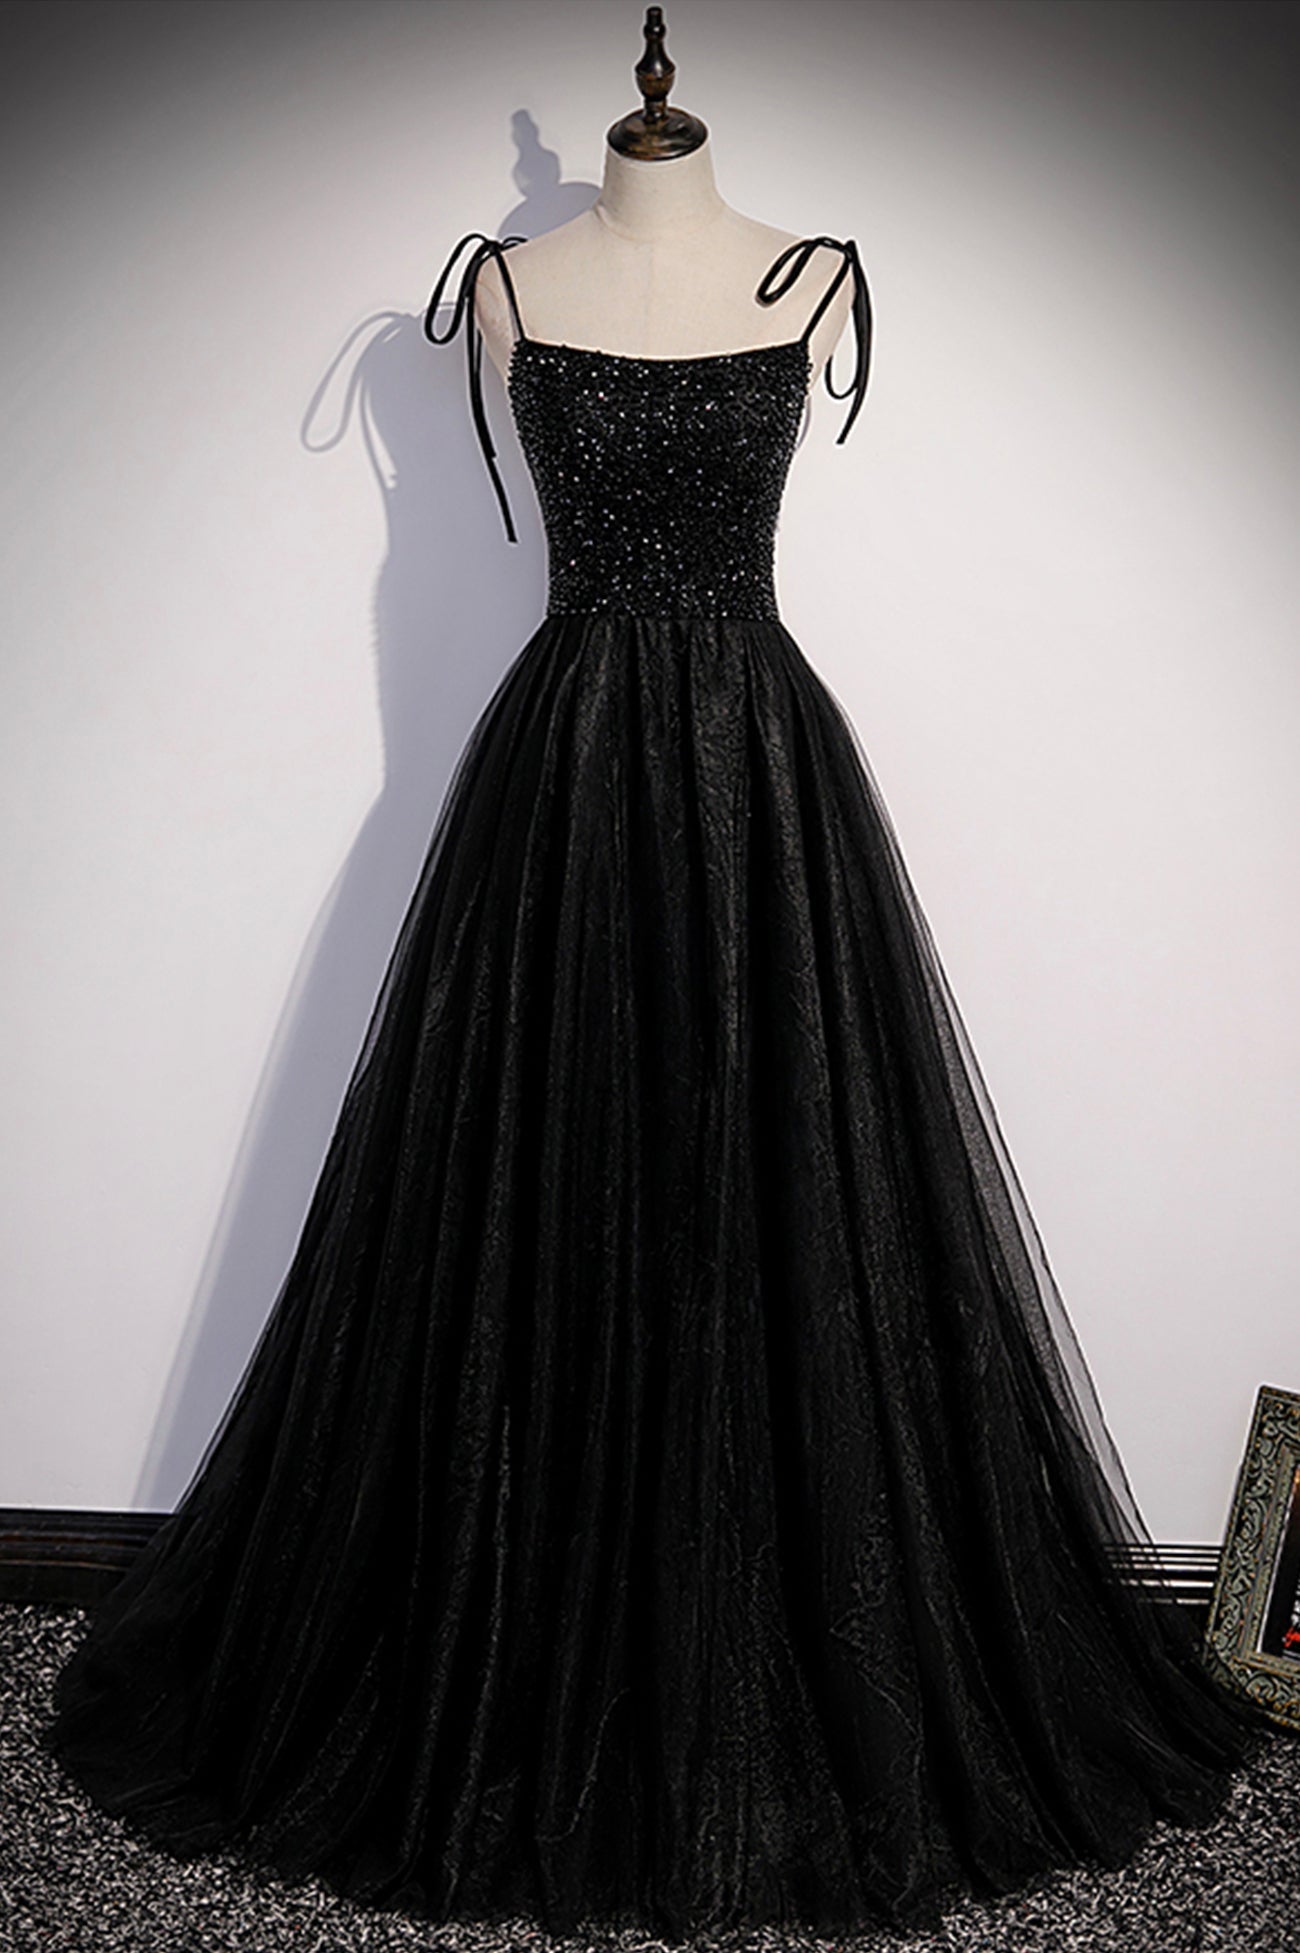 Black Tulle Beaded Long Prom Dress Outfits For Girls, A-Line Spaghetti Straps Evening Dress